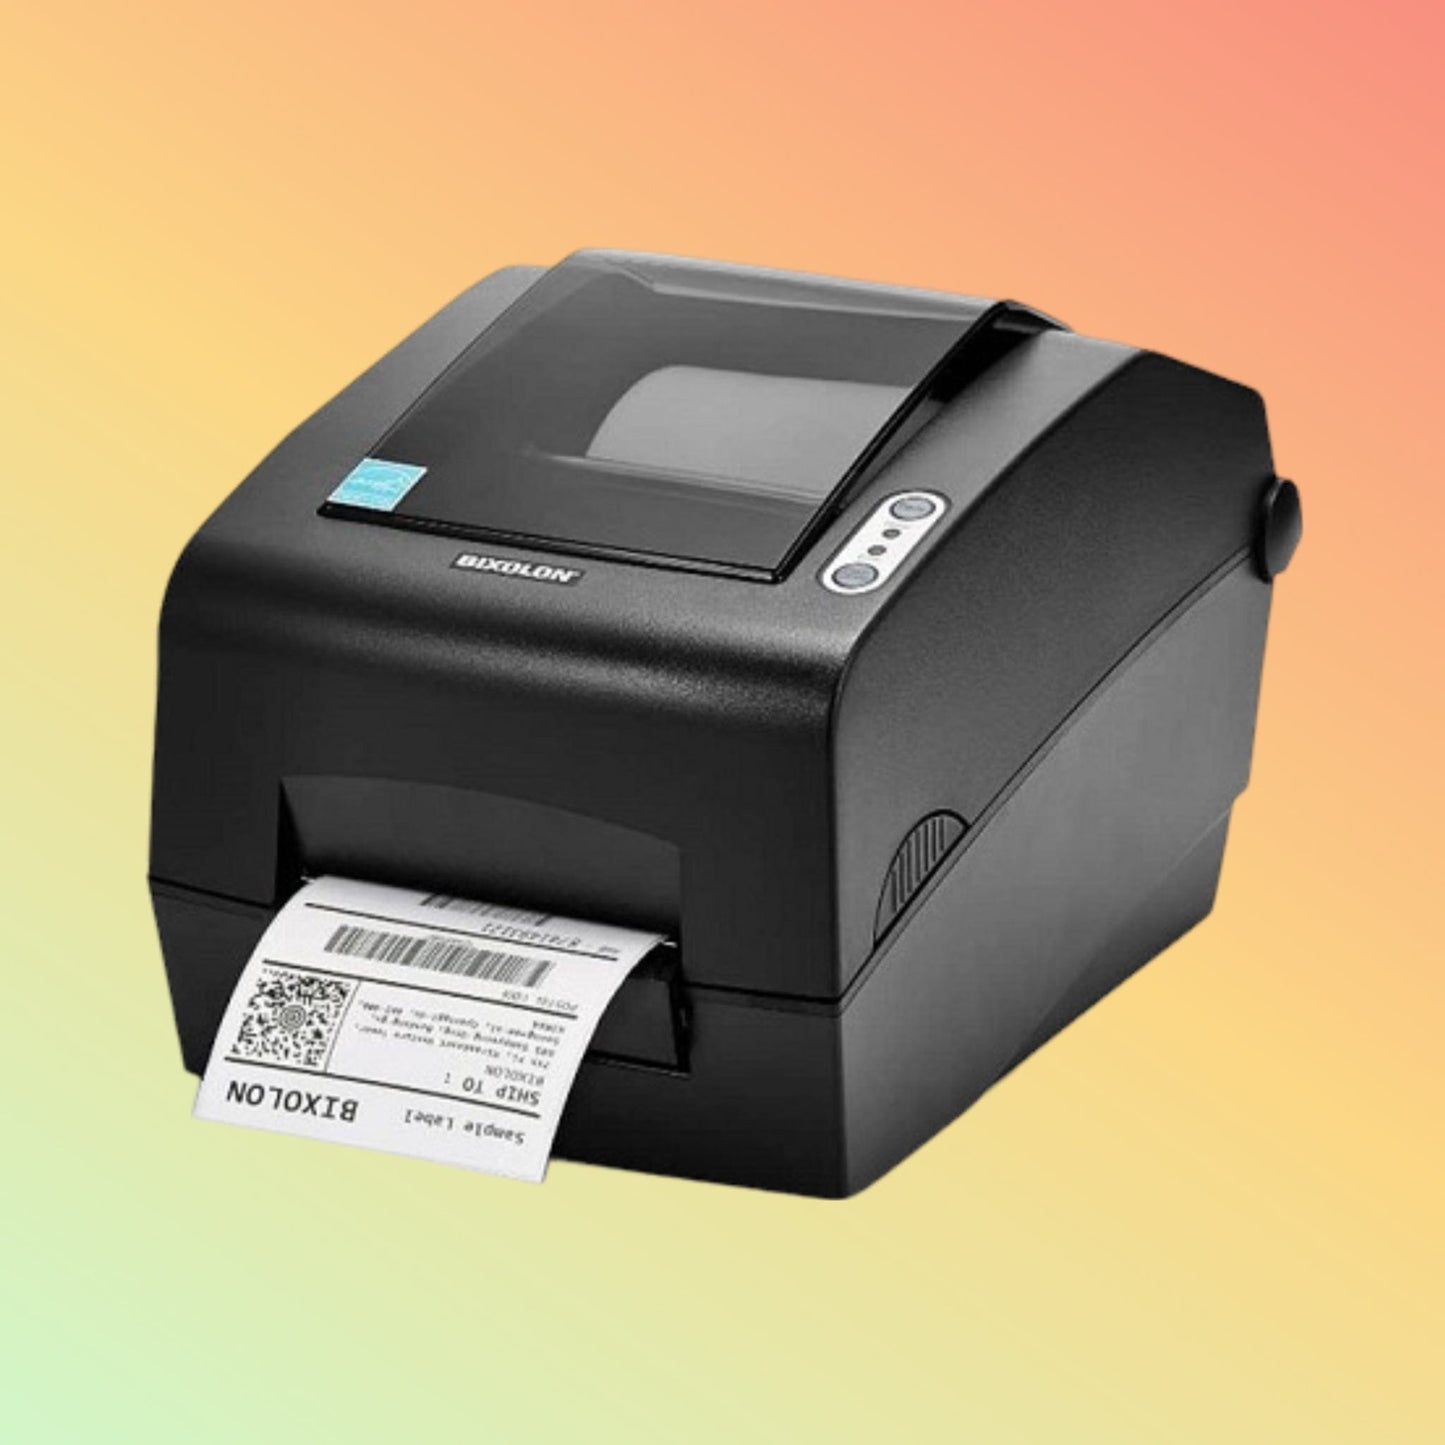 "BIXOLON SLP-T400 high-speed printer for 2D barcode compliance labels, ideal for manufacturing, logistics, and retail sectors."